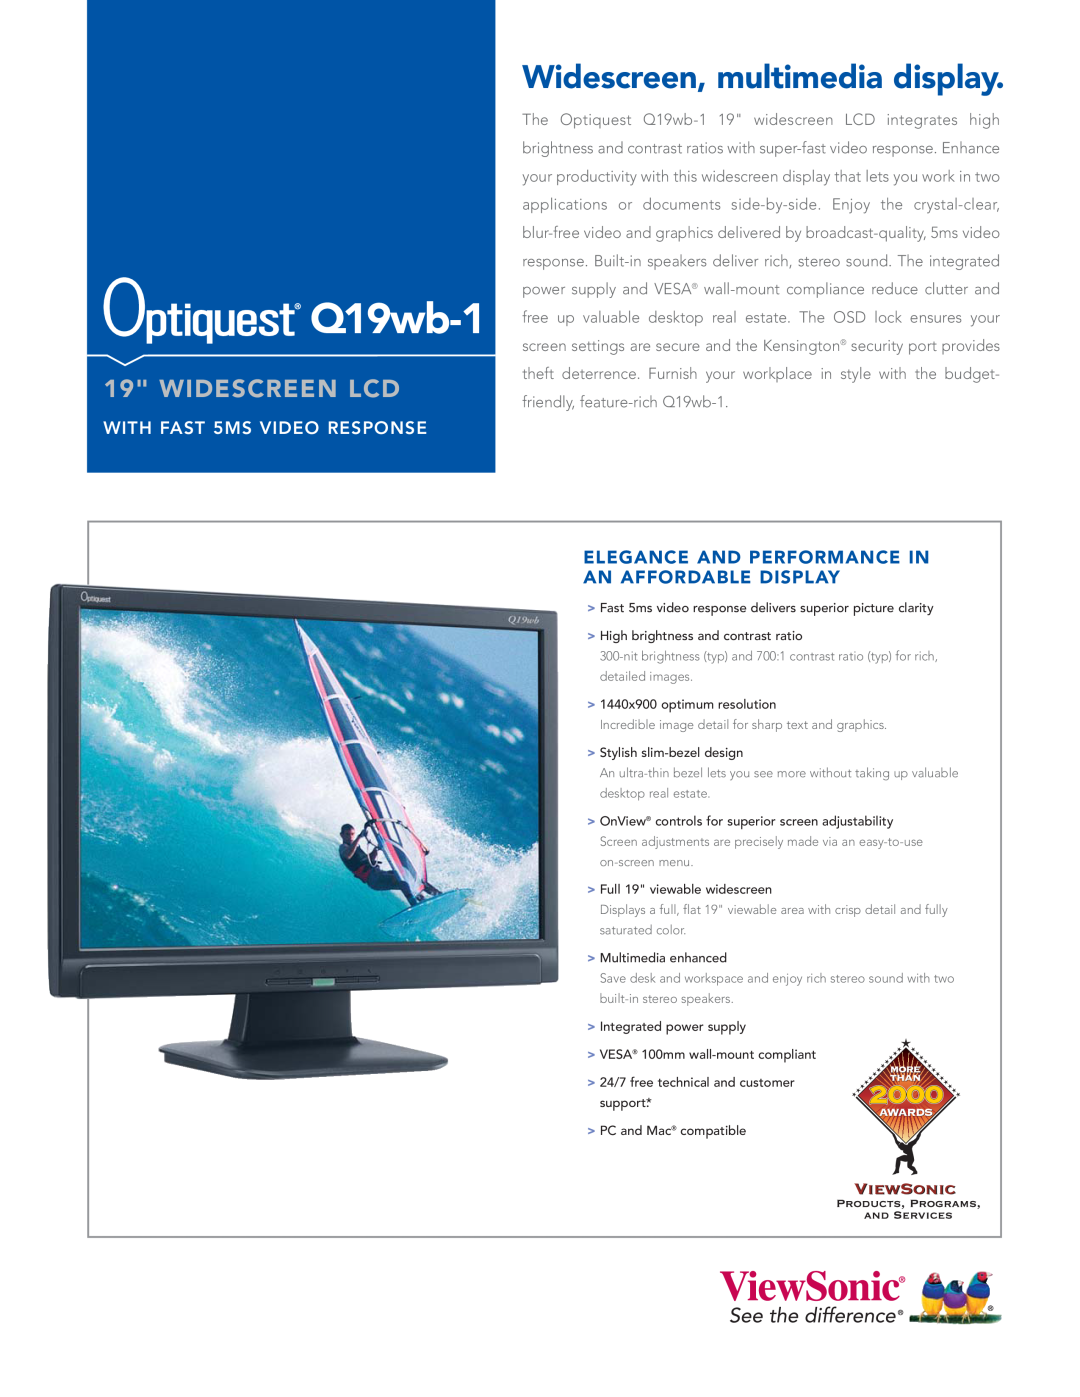 ViewSonic Q19wb-1 manual Widescreen, multimedia display, Widescreen Lcd, Elegance And Performance In An Affordable Display 